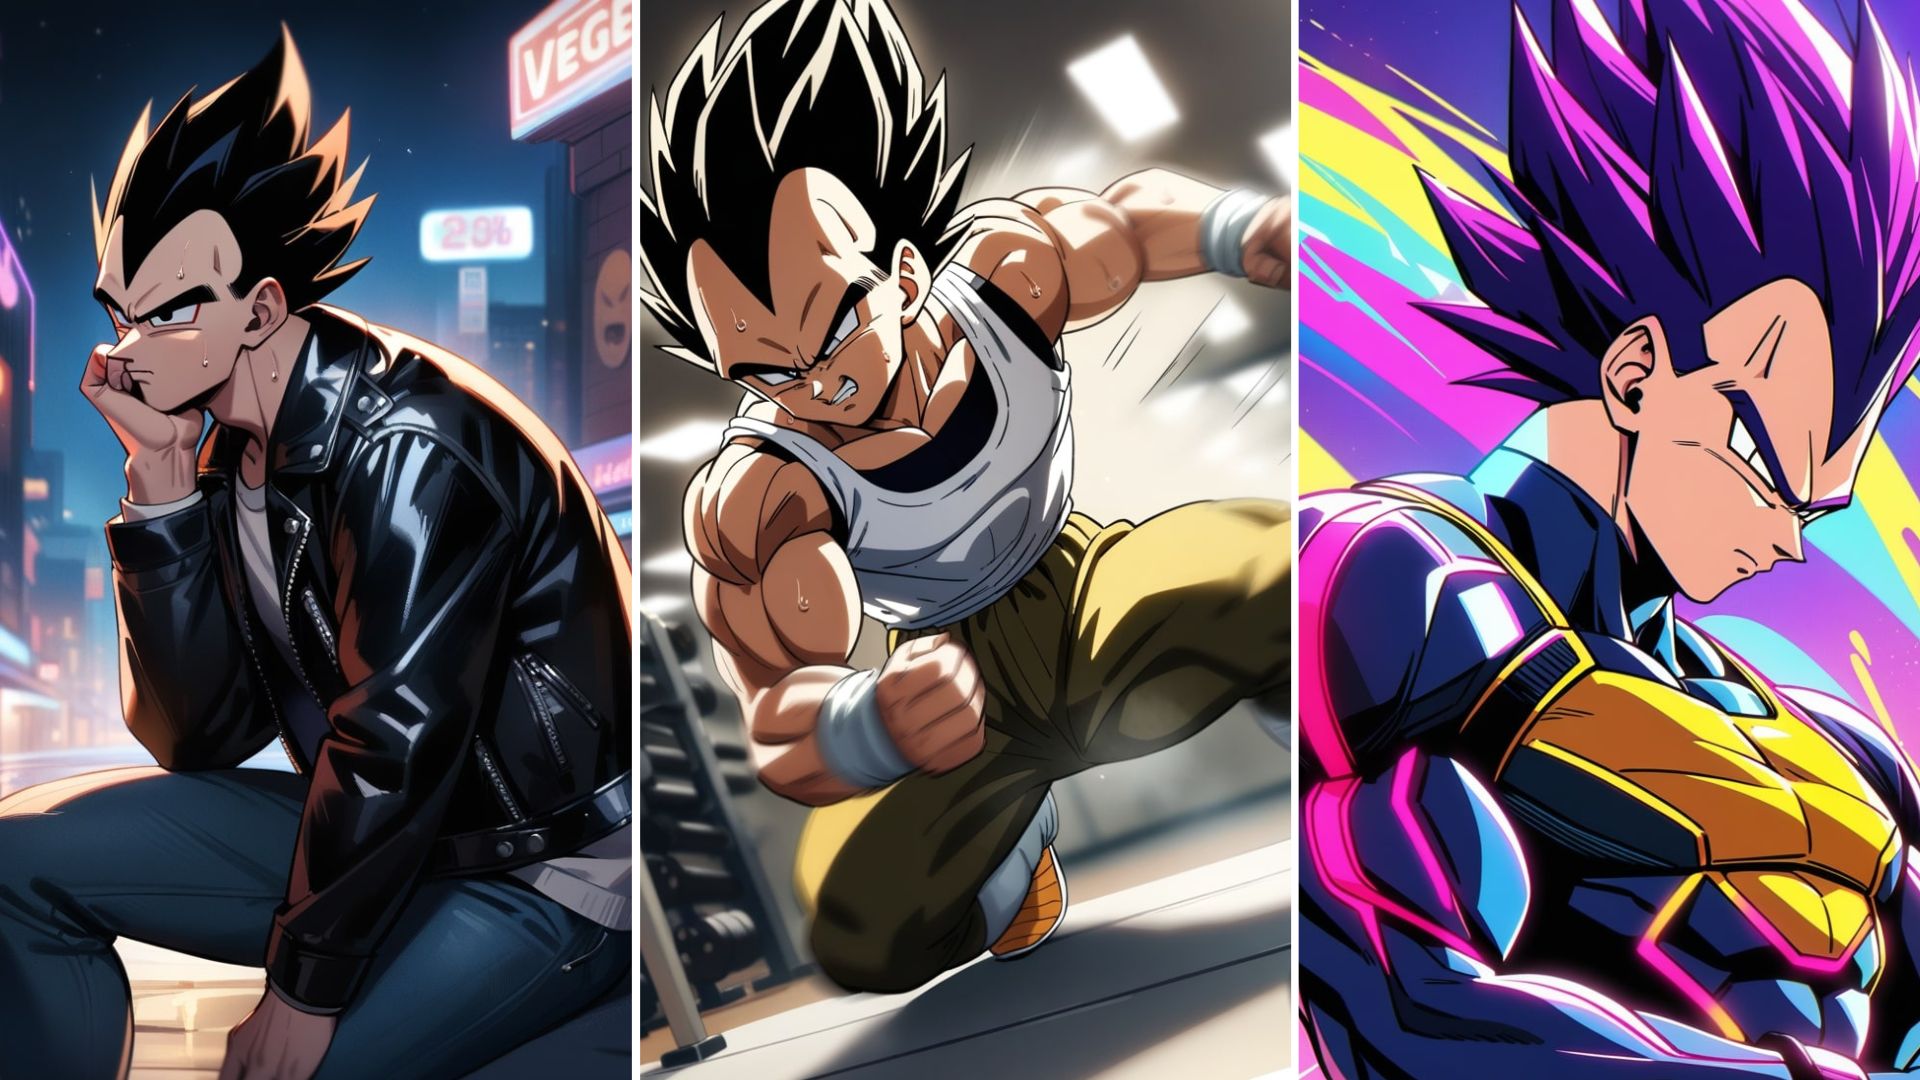 Wallpapers of Vegeta from Dragon Ball